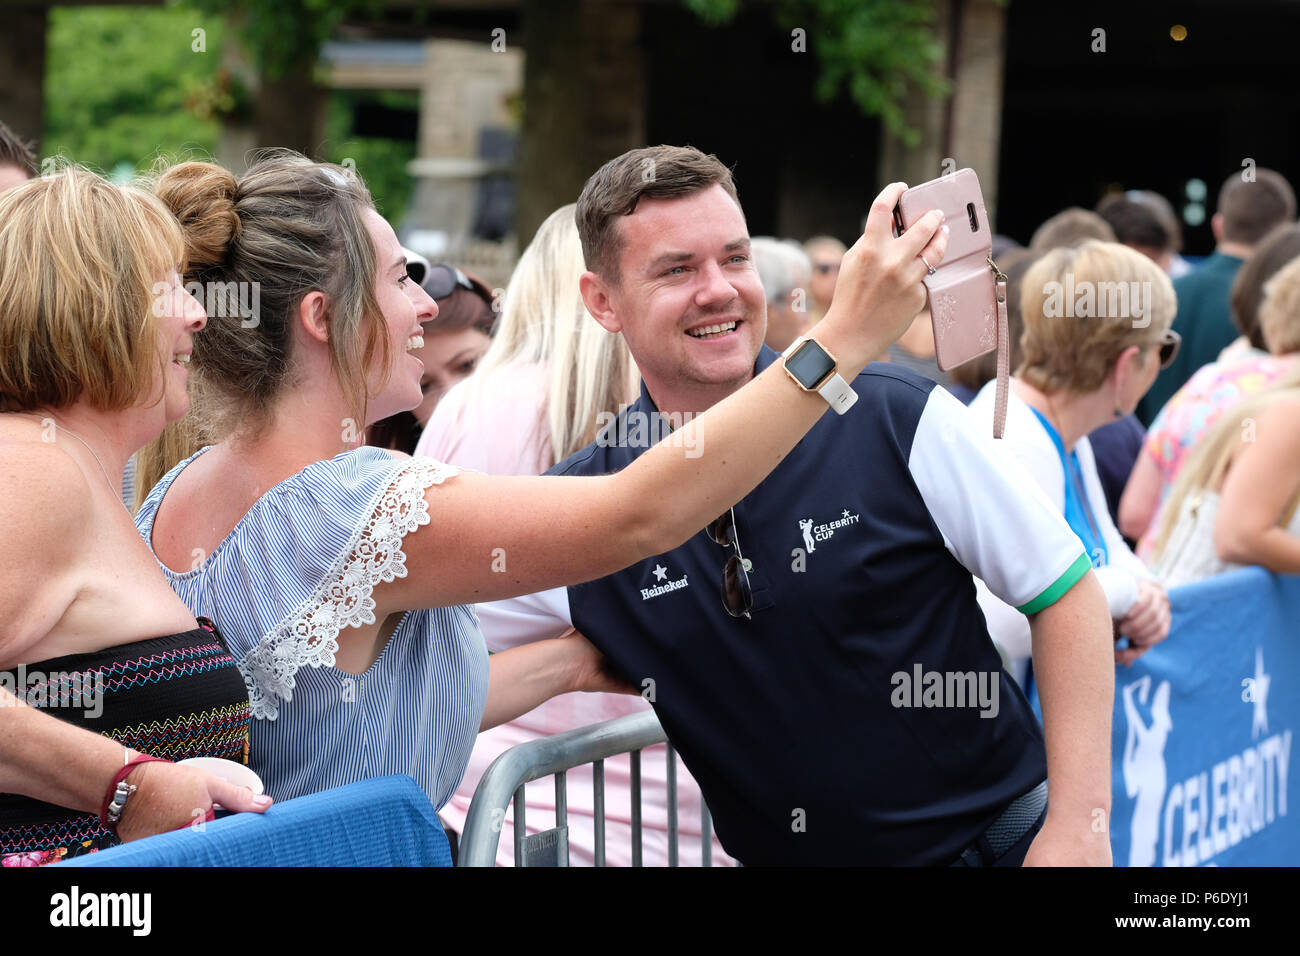 Newport, UK, 30 June 2018. Celebrity Cup golf tournament - Celtic Manor, Newport, Wales, UK - Saturday 30th June - Actor Danny O'Carroll playing for Team Ireland poses with fans at the Celebrity Cup. Photo Steven May / Alamy Live News Stock Photo